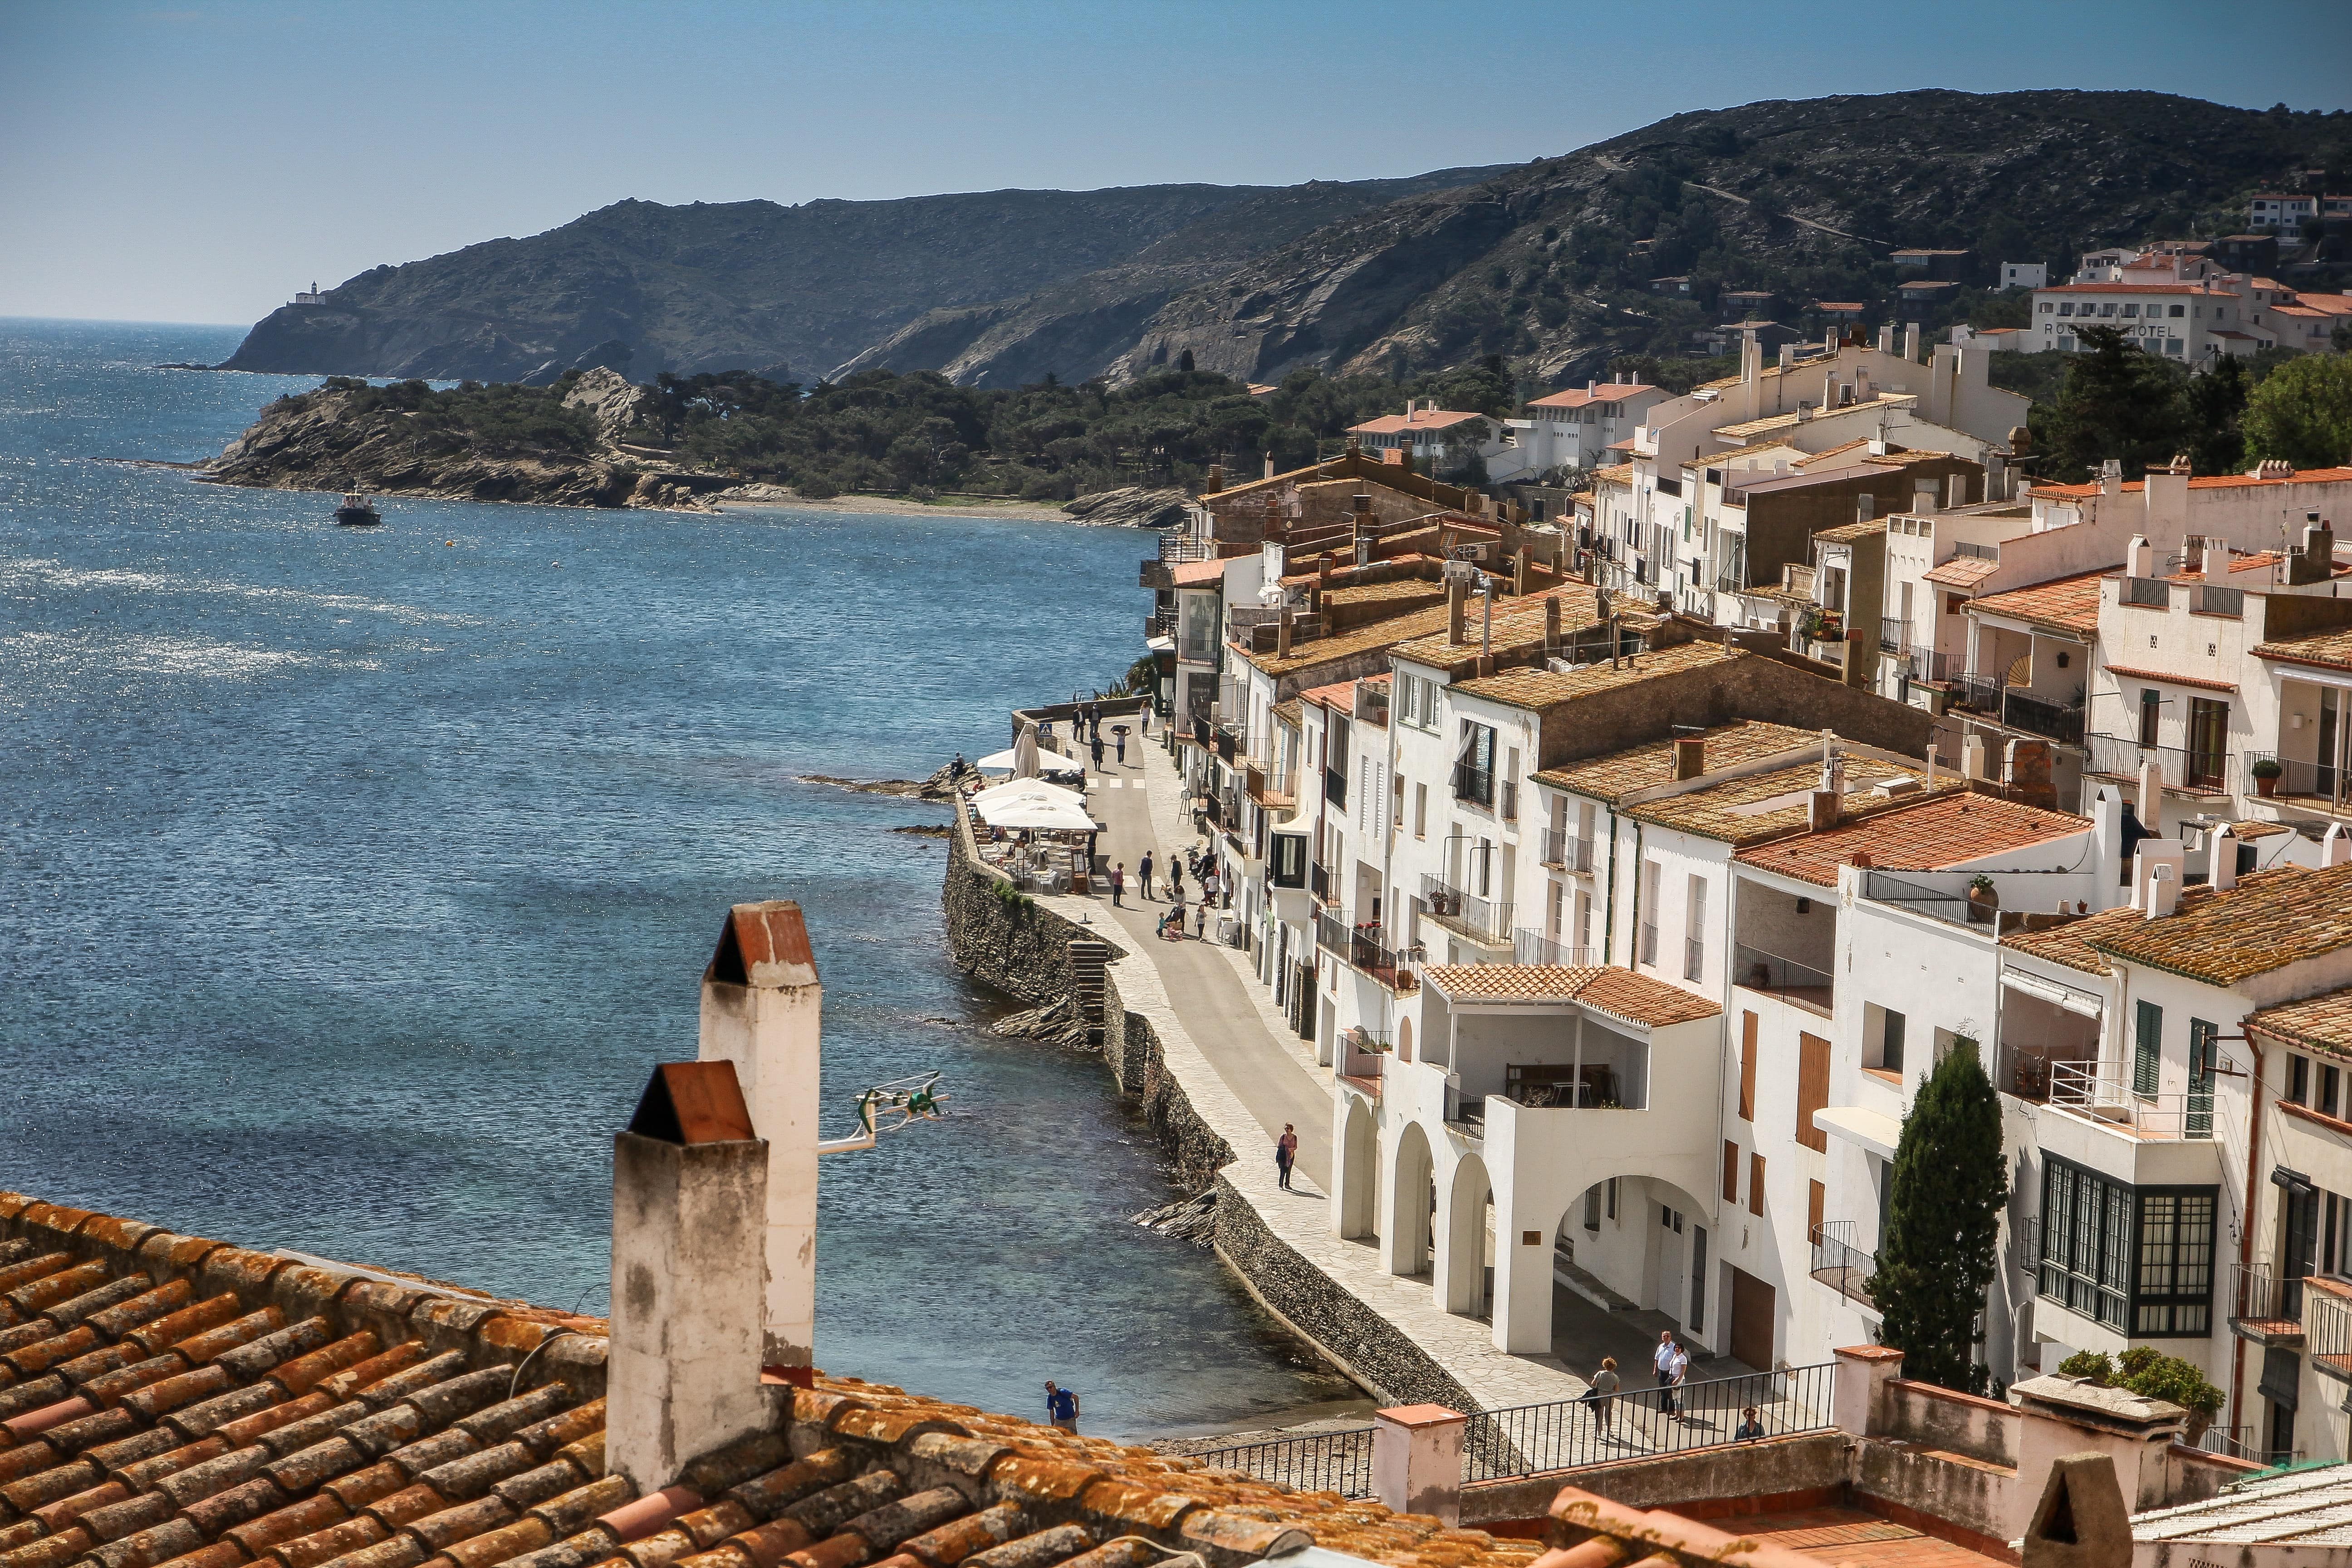 Cadaques will charm you with its art scene and stunning sea views